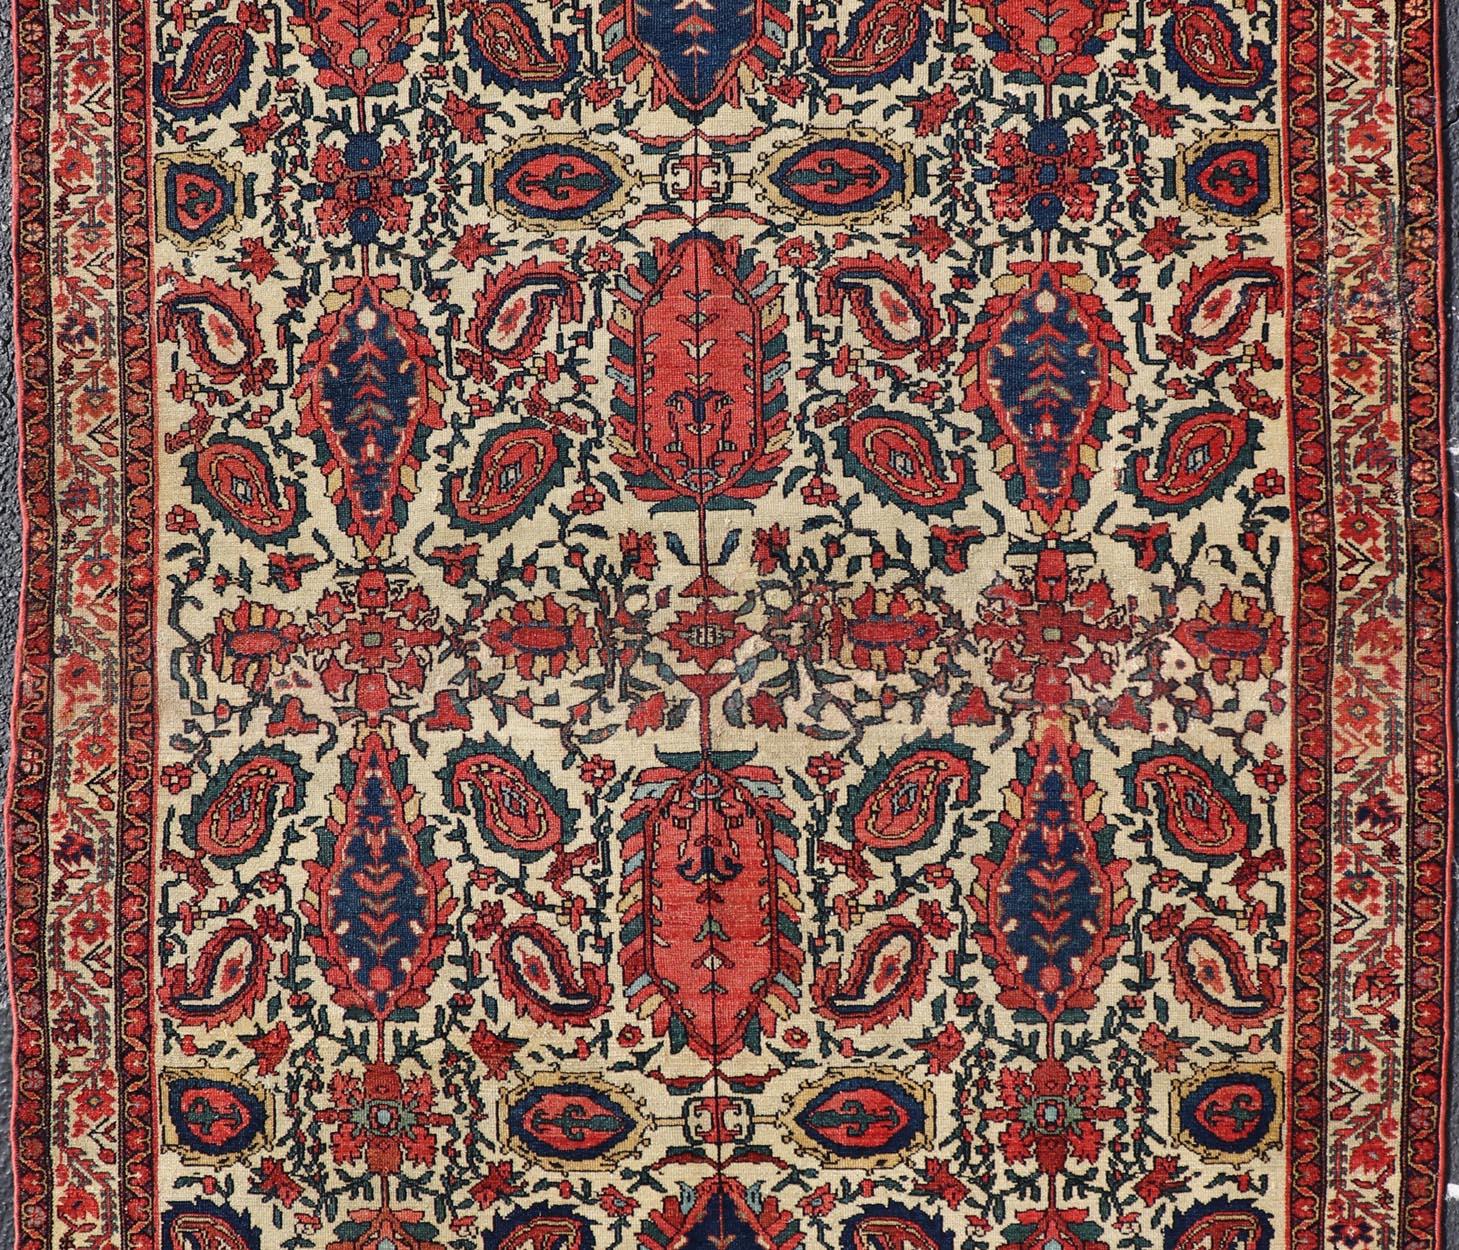 Paisley design antique Persian Malayer rug in ivory, red, blue, brown, rug 18-0407, country of origin / type: Iran / Malayer, circa 1900.

This beautiful antique early 20th century Persian Malayer carpet features an all-over design of repeating